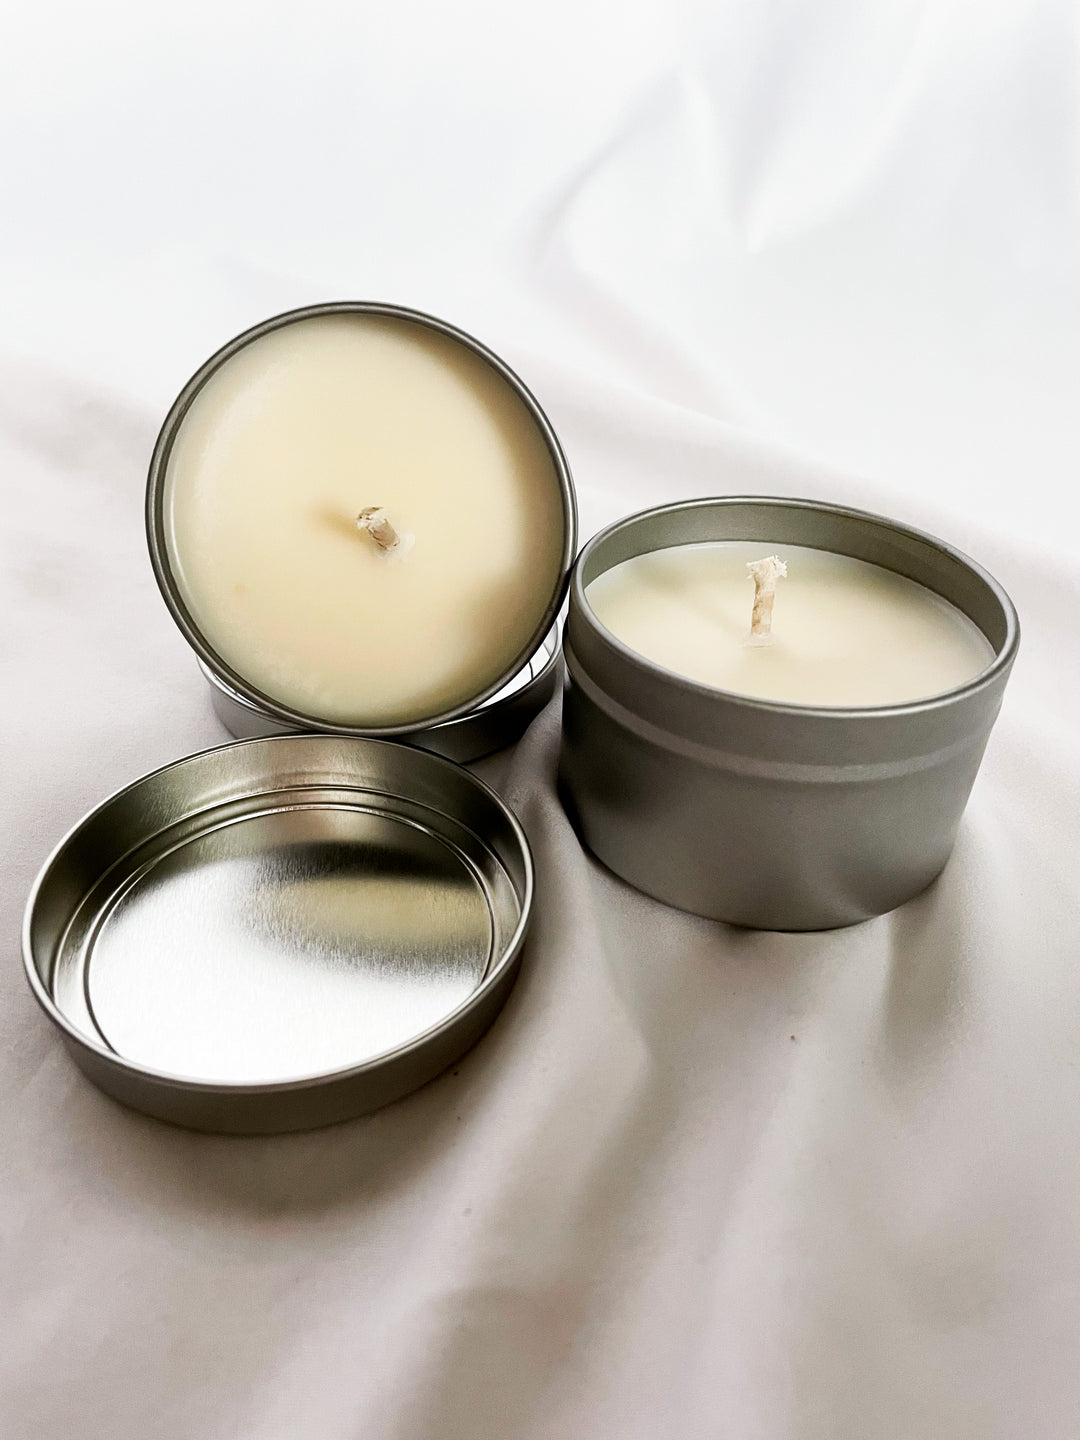 California made Brandied Pear Soy Wax Candle